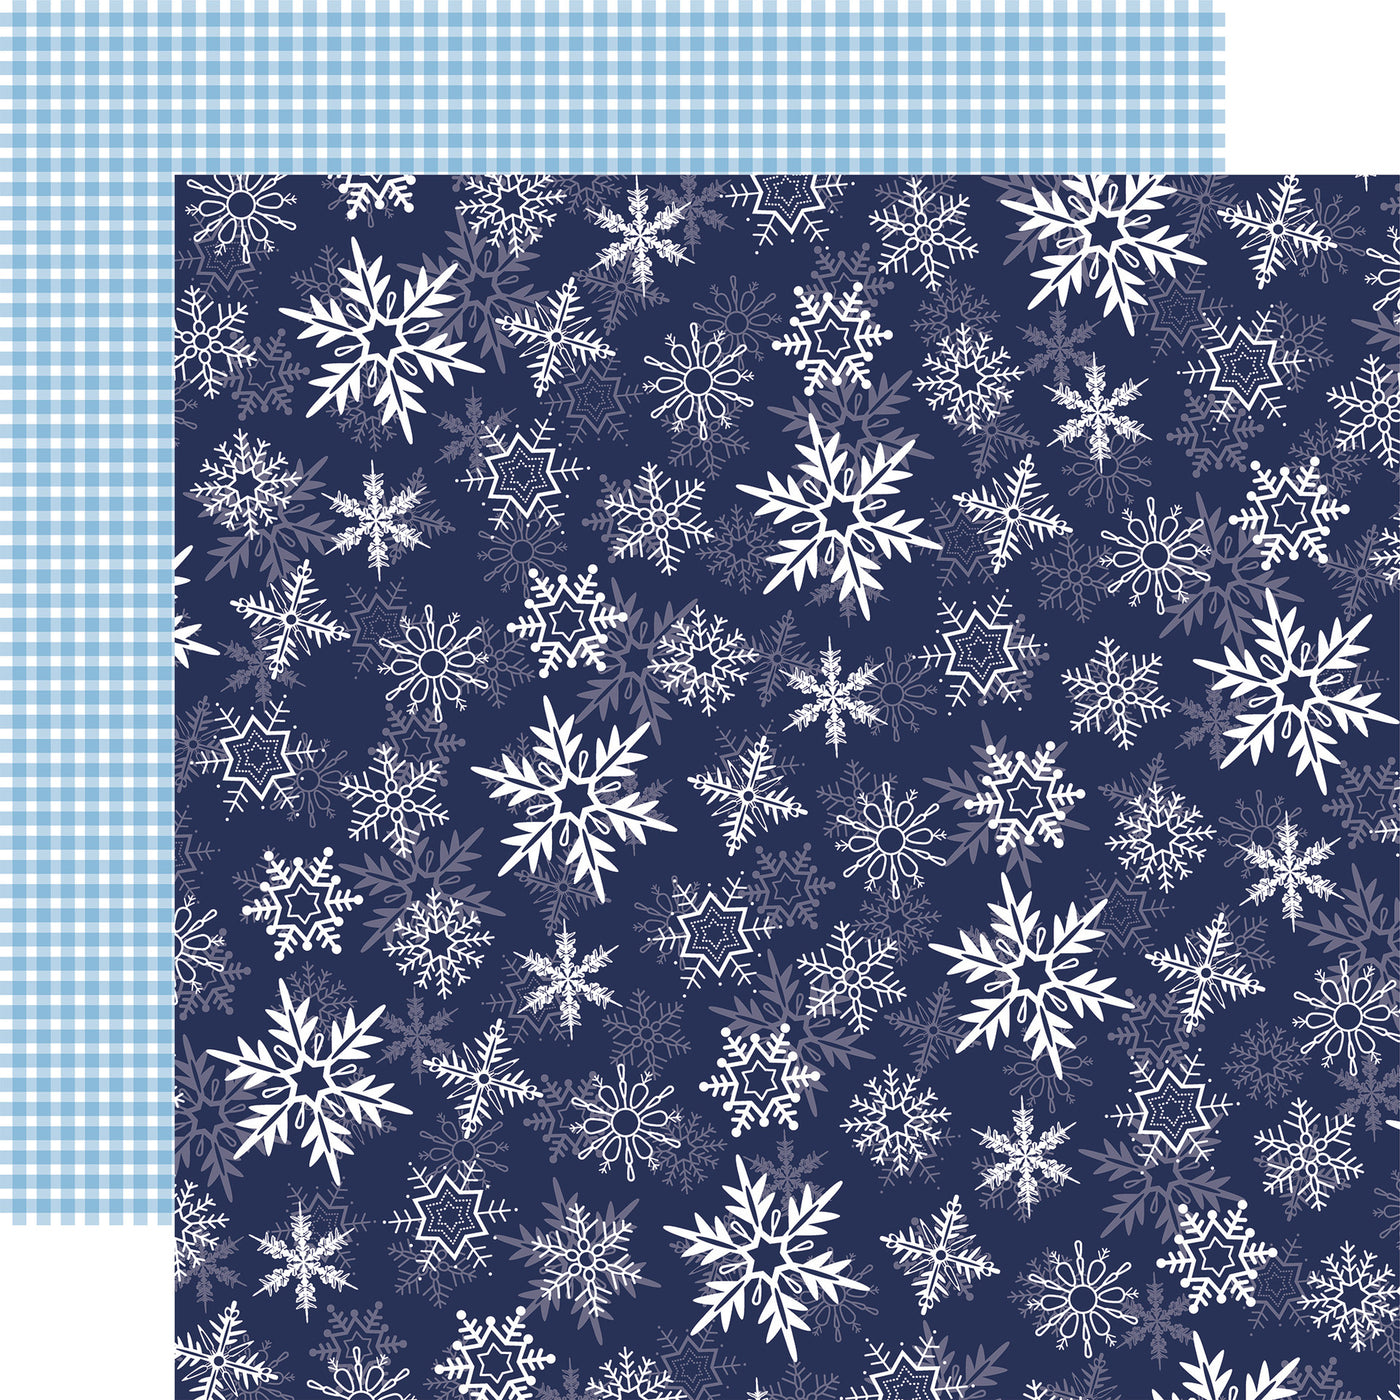 This is double-sided 12x12 cardstock with white snowflakes on a navy blue background; the reverse is light blue gingham. 80 lb cover. Felt texture.